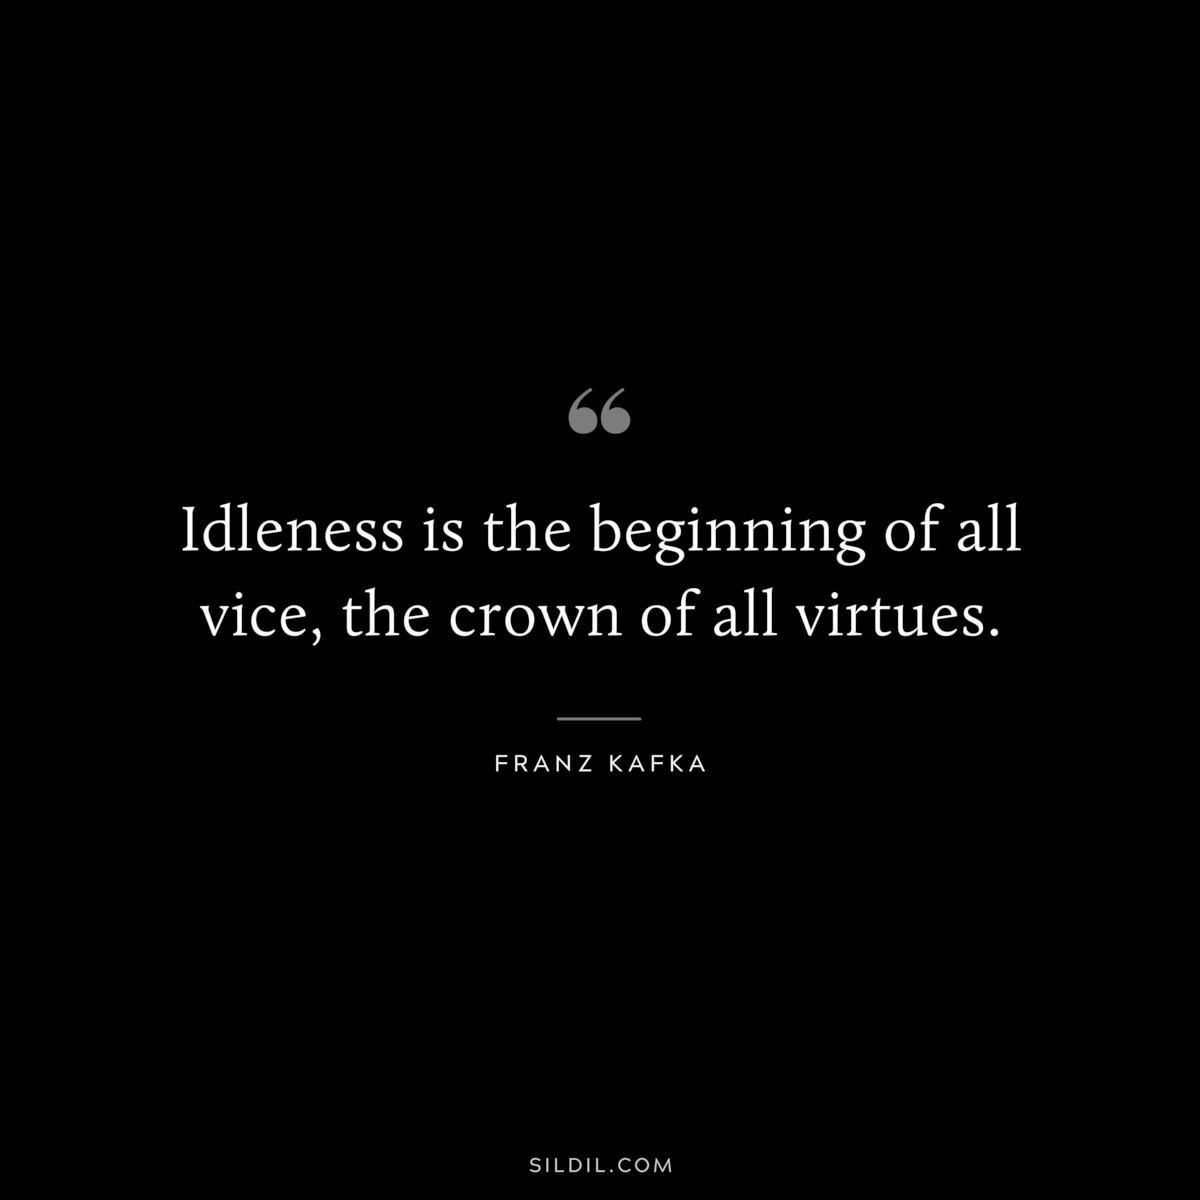 Idleness is the beginning of all vice, the crown of all virtues. ― Franz Kafka